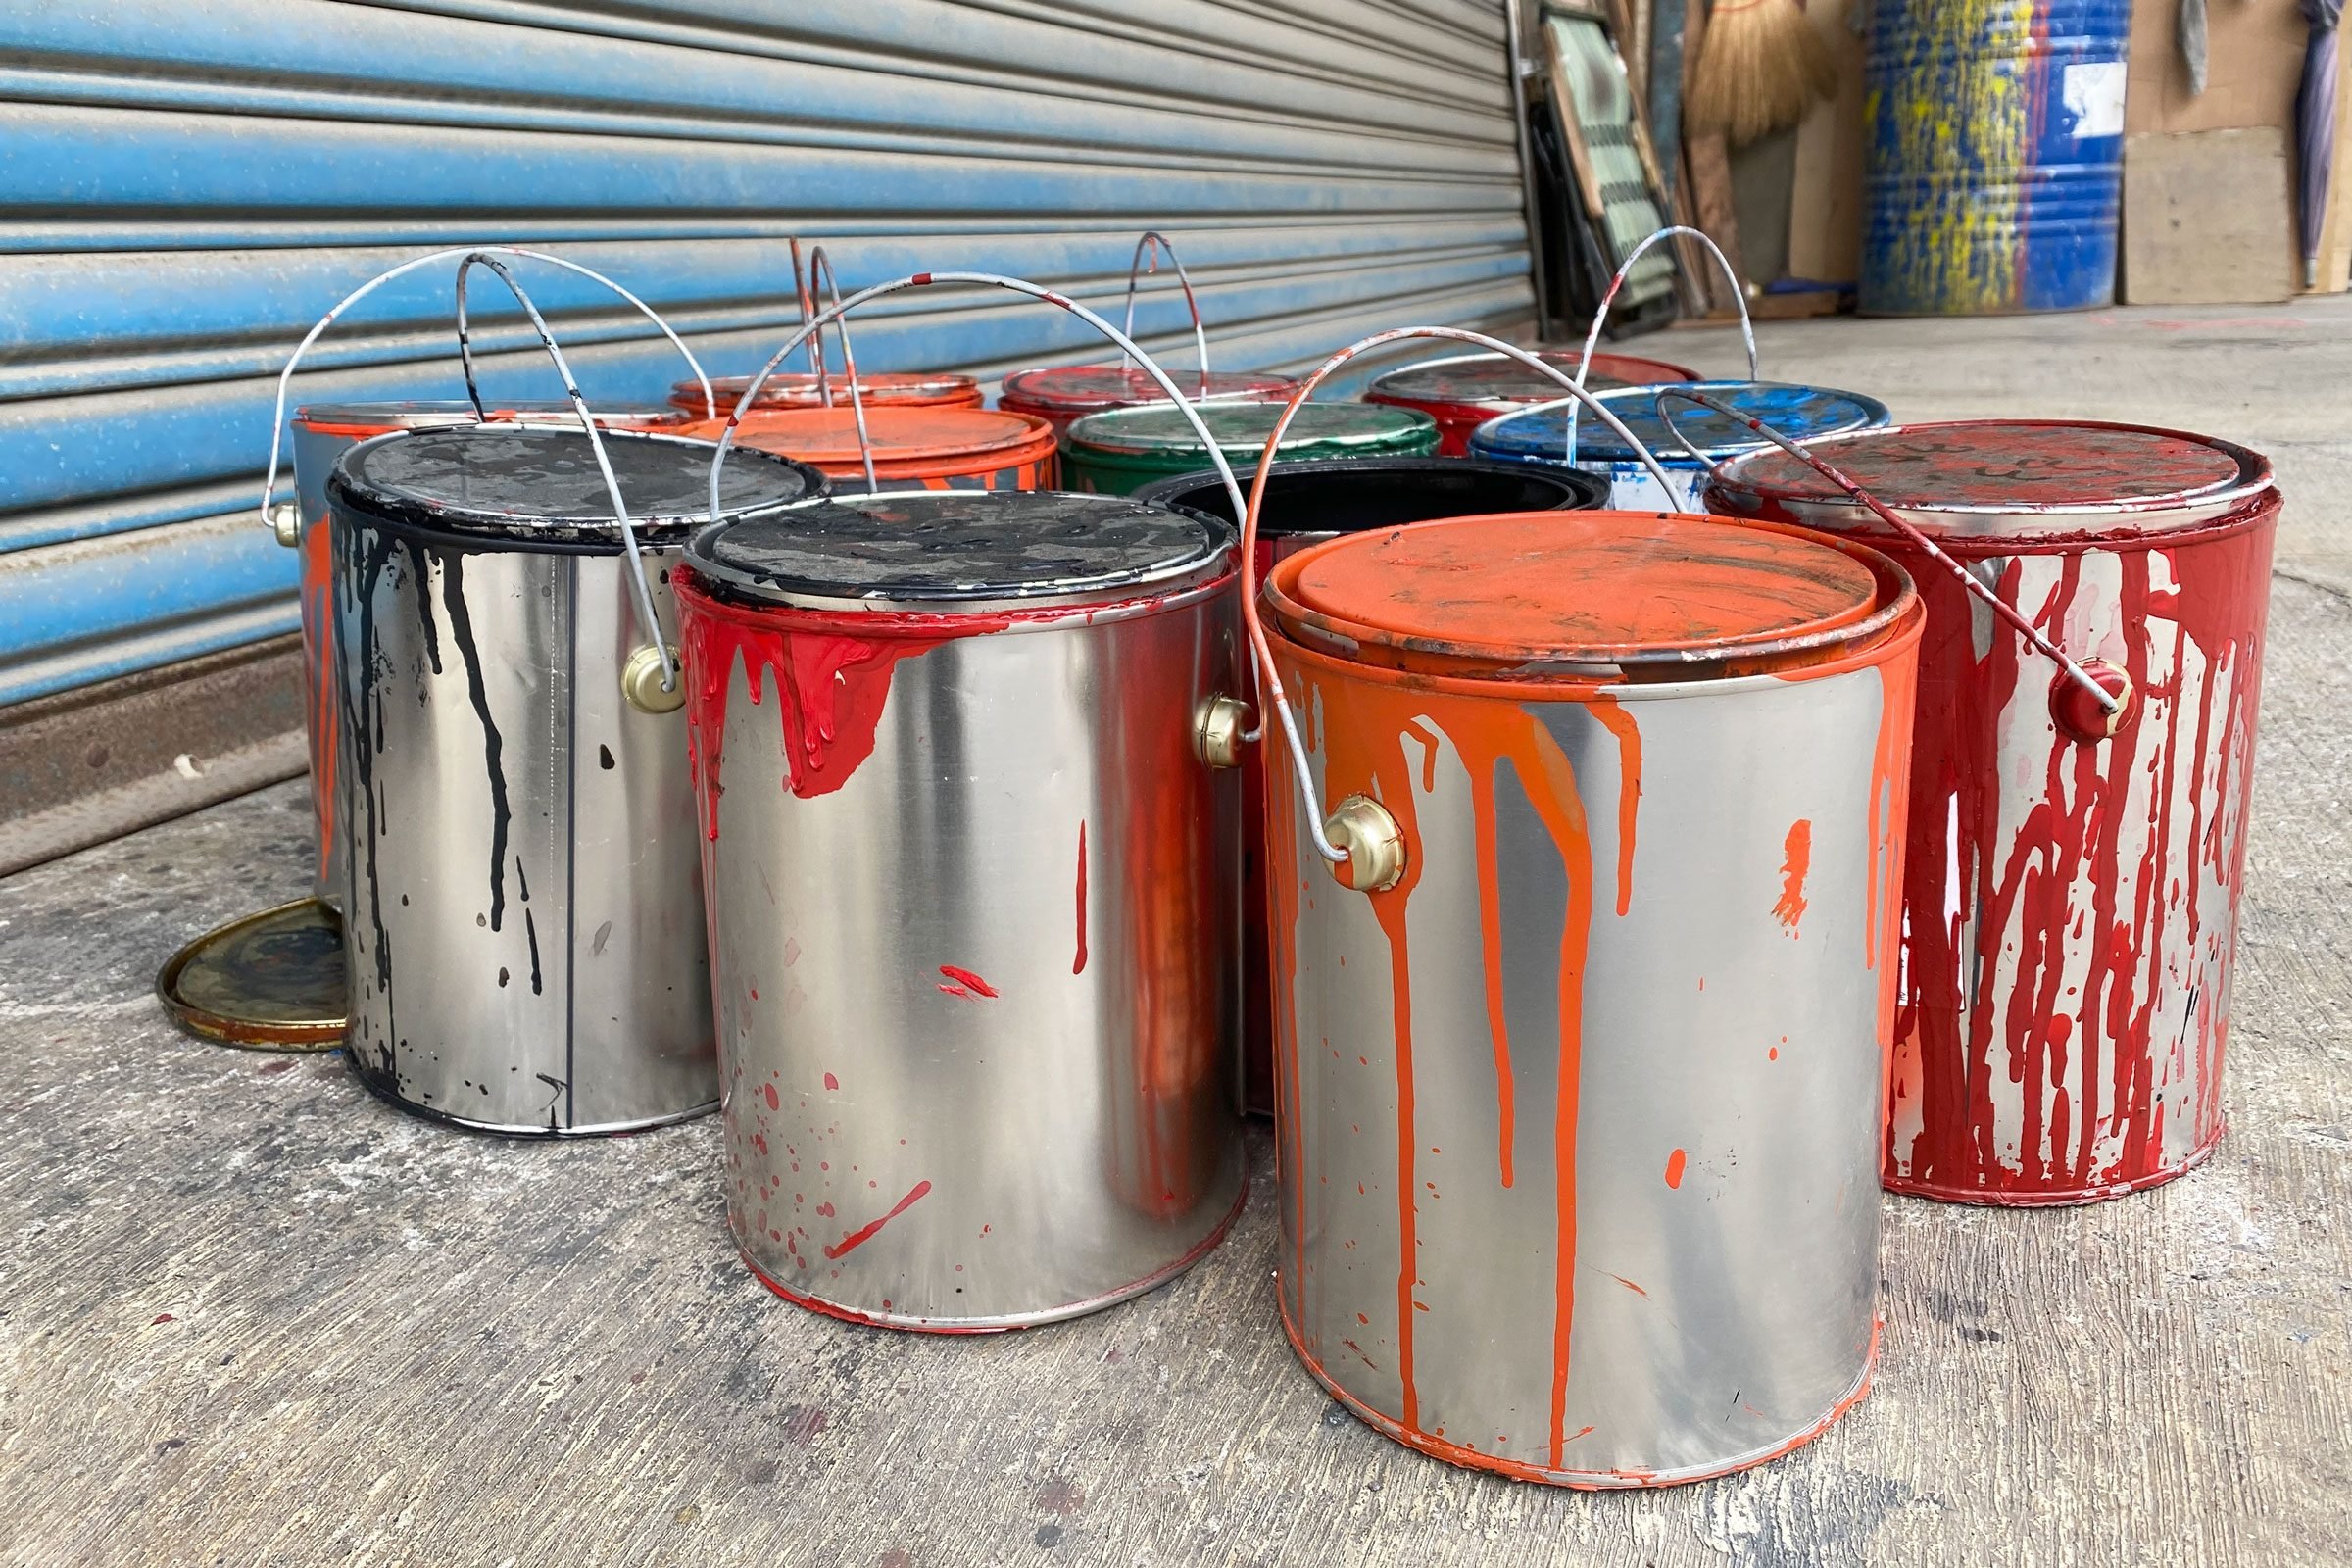 Should You Recycle Paint?